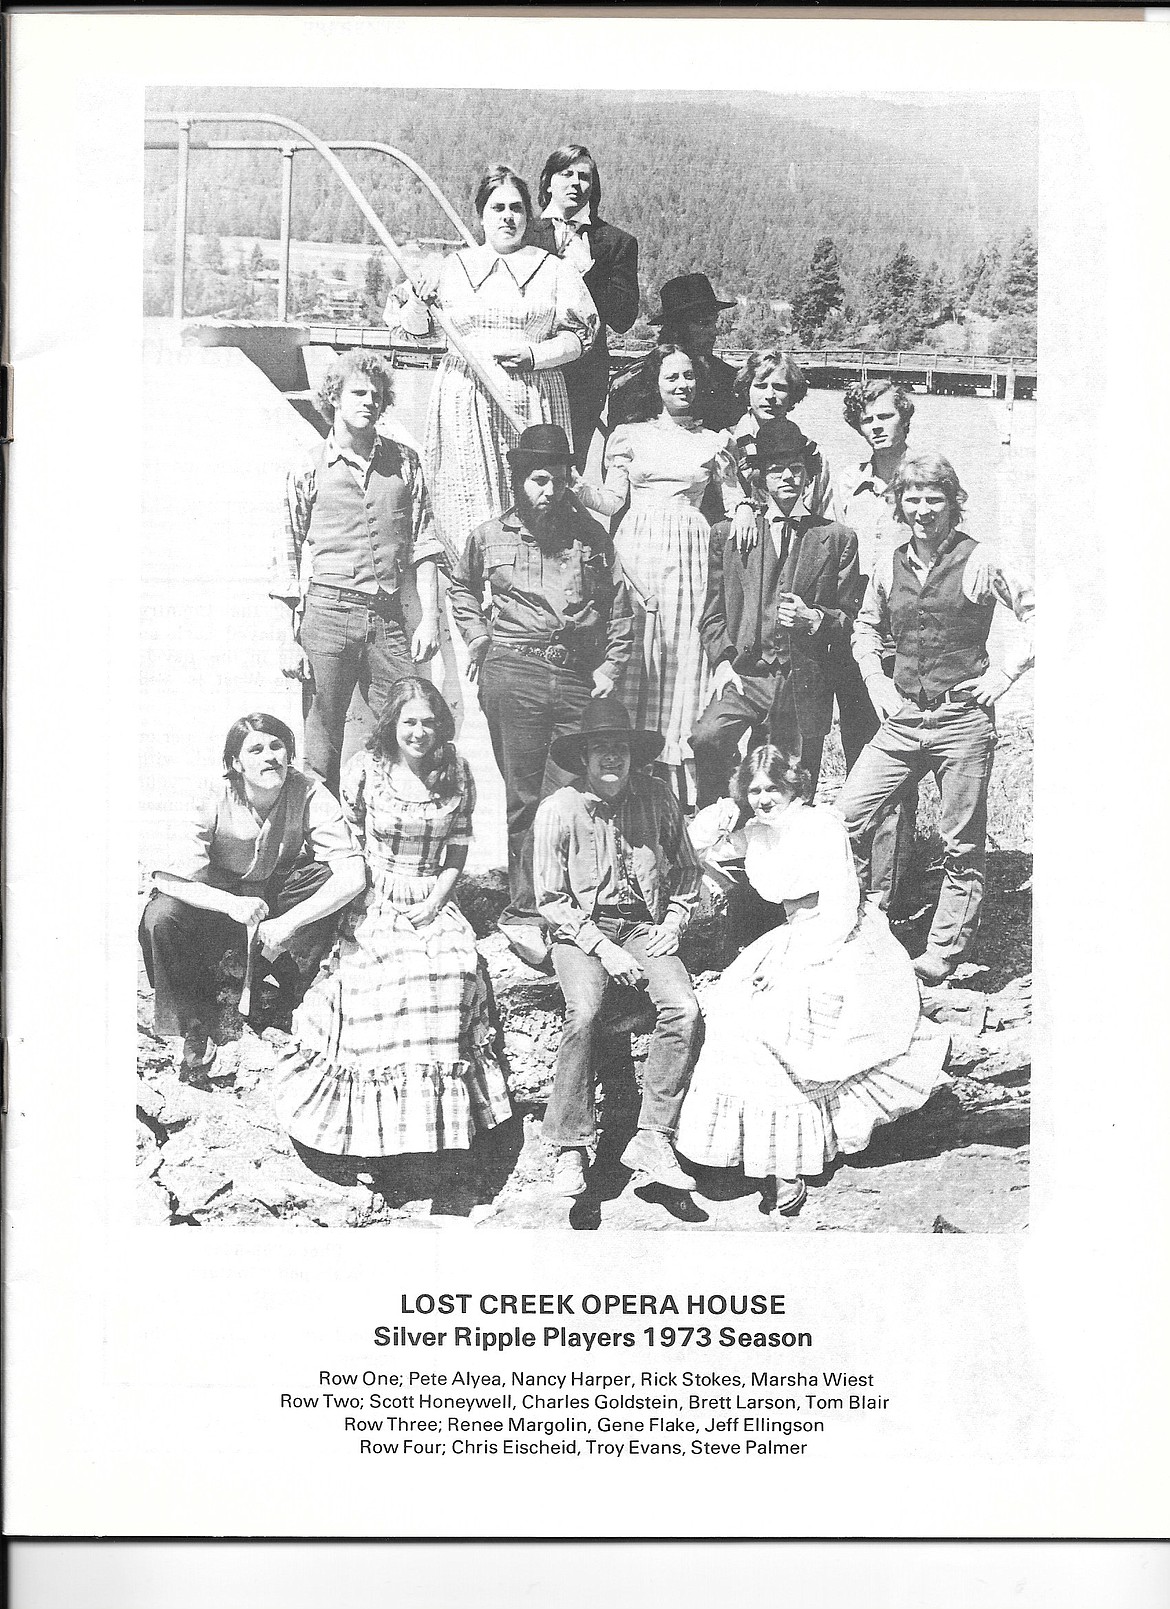 TROY EVANS is seen at the top of this cast photo for the Silver Ripple Players, one of the many configurations under which the early drama program at FVCC presented plays.